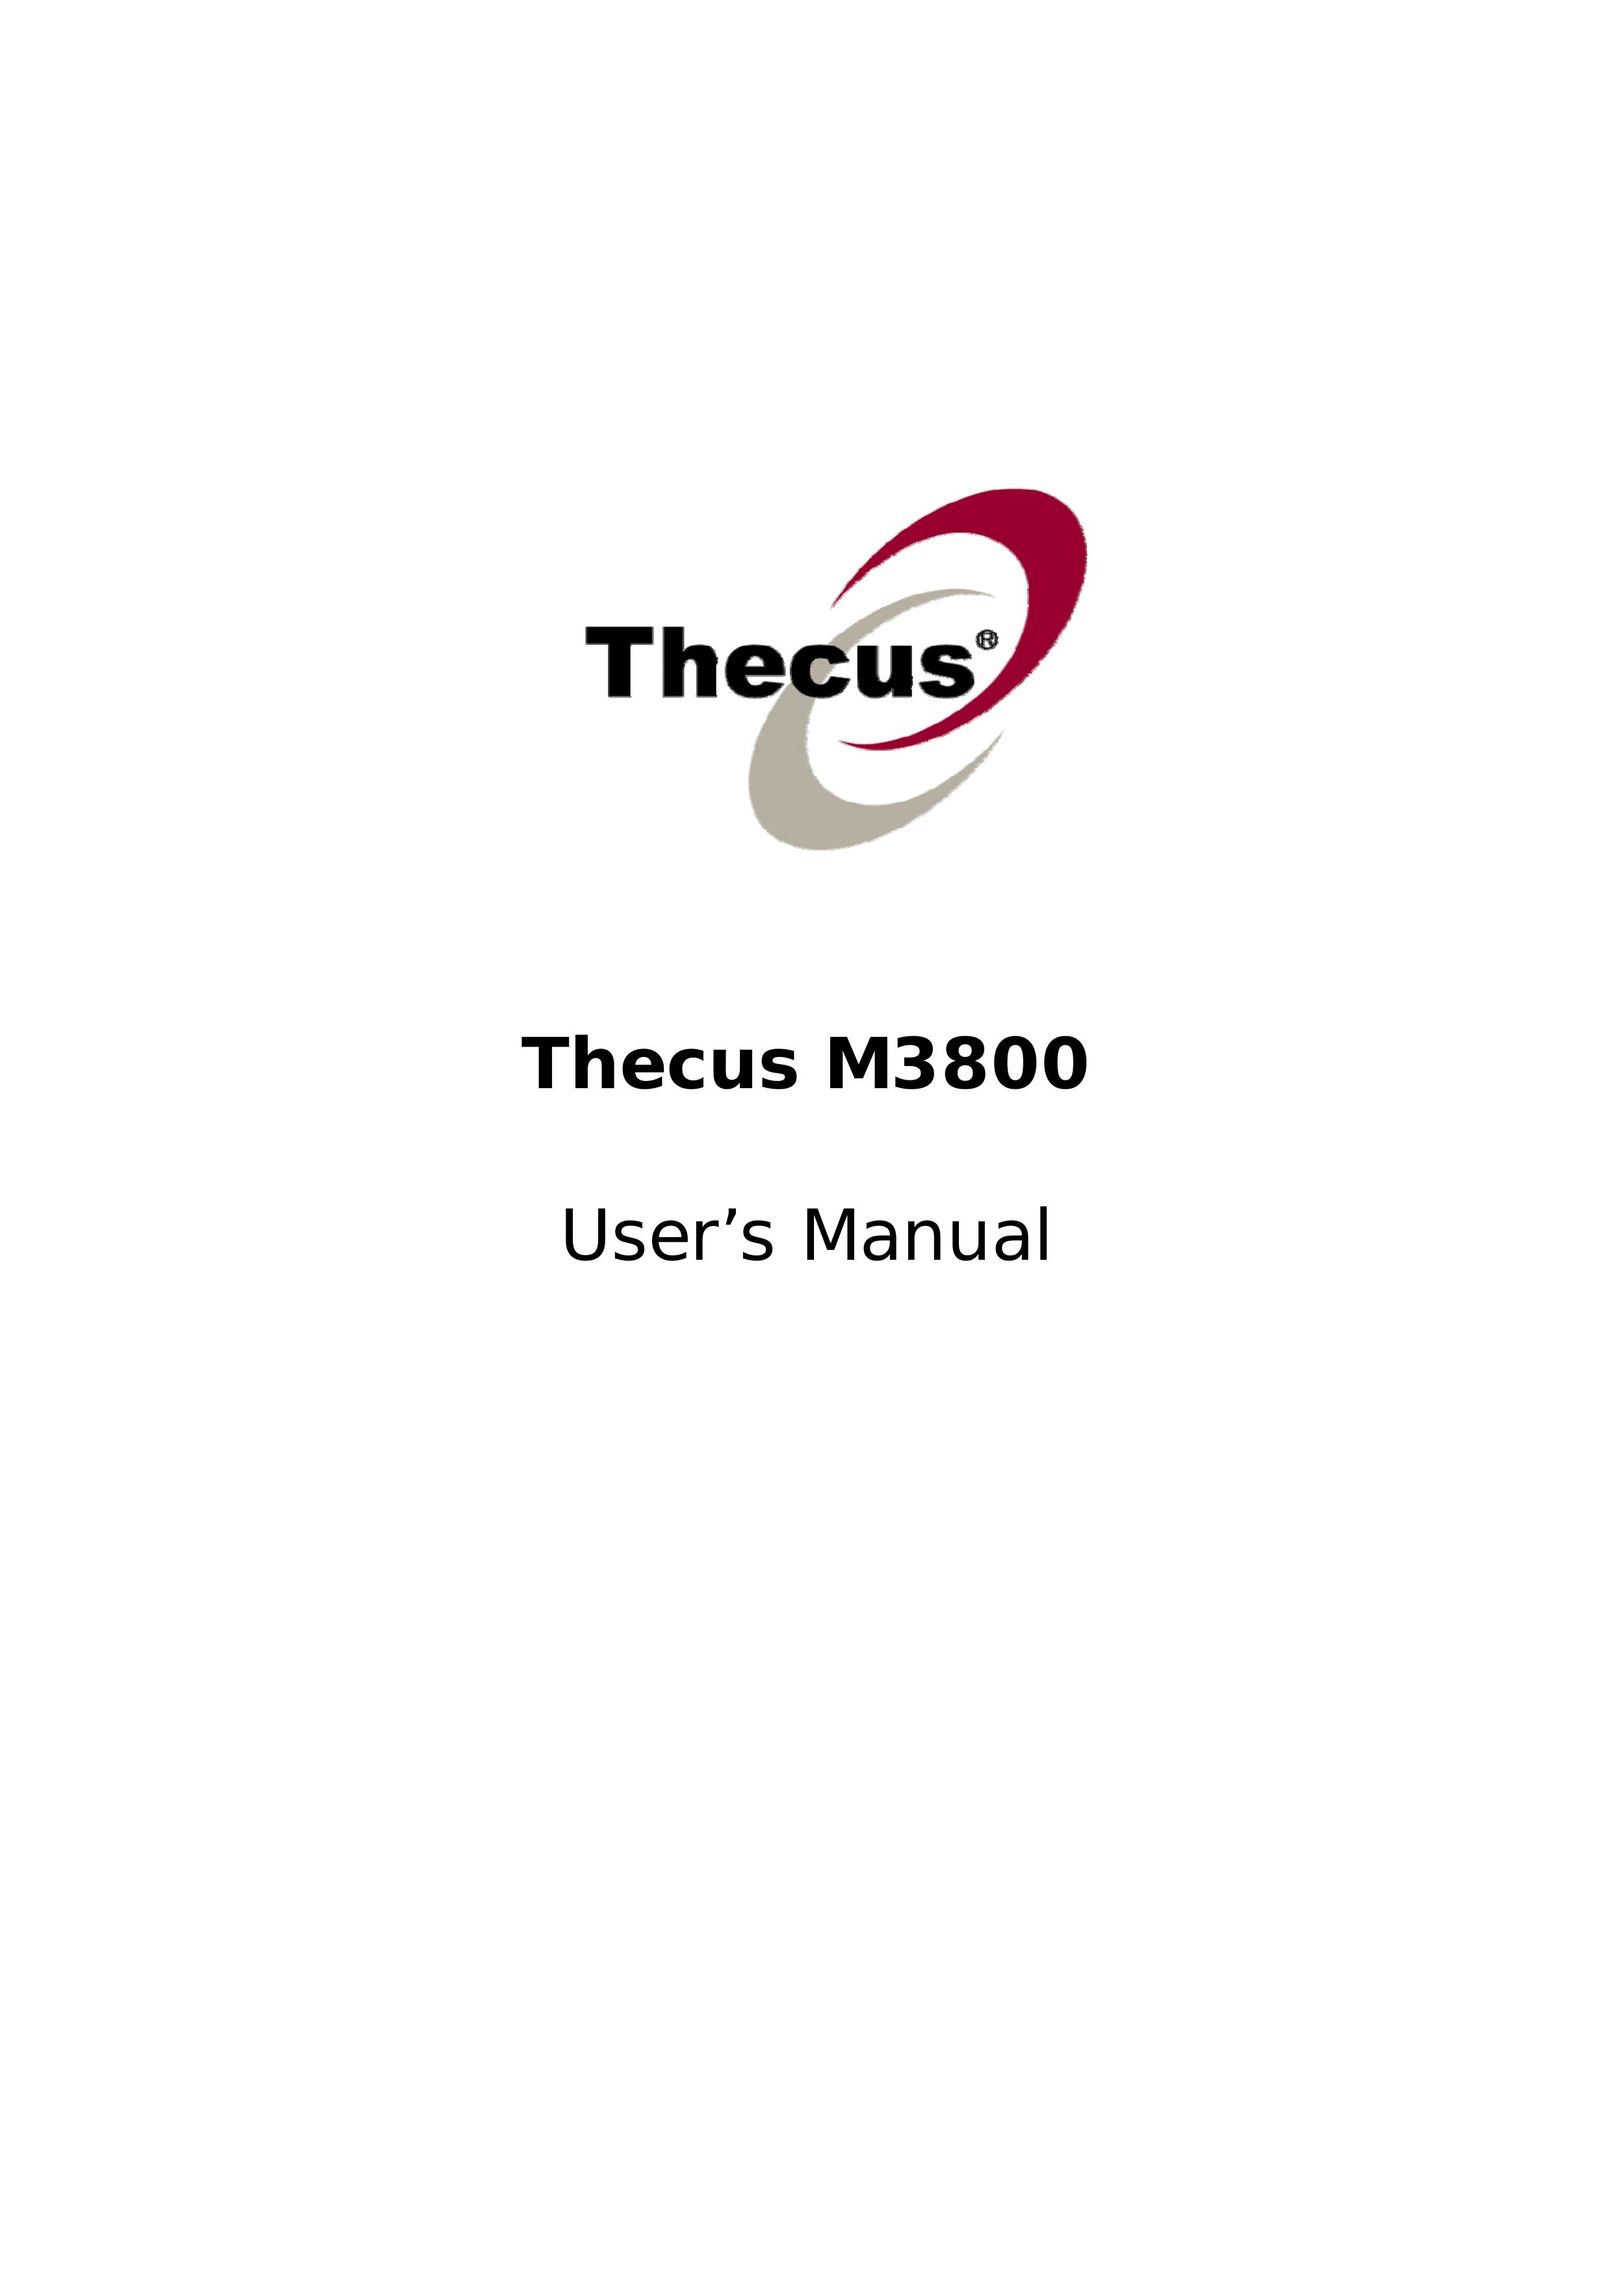 Thecus Technology M3800 Home Theater Server User Manual